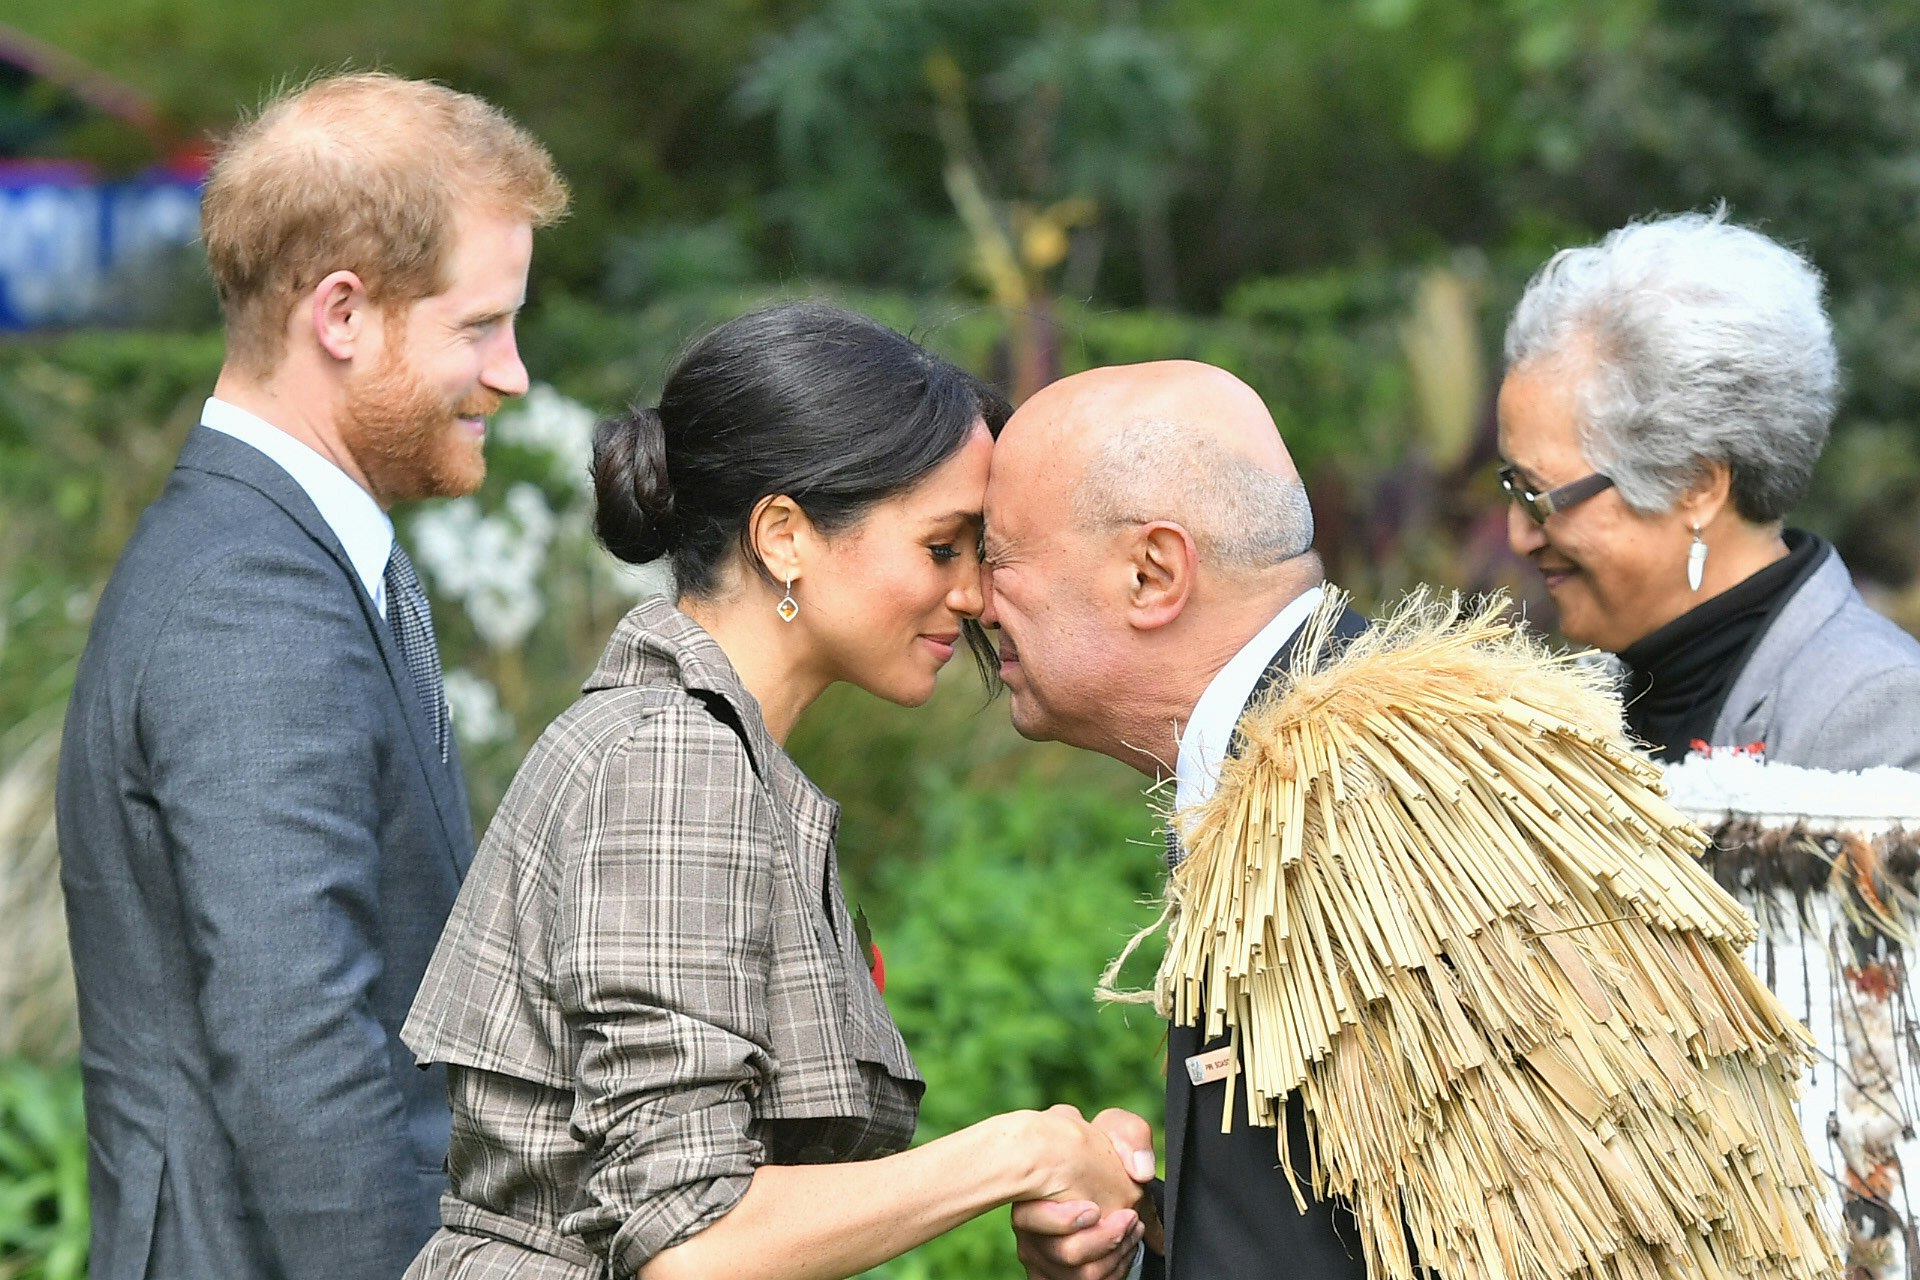 Prince Harry, Duke of Sussex and Meghan, Duchess of Sussex greet Maori elders while attending a traditional welcome ceremony on the lawns of Goverment House on October 28, 2018 in Wellington, New Zealand